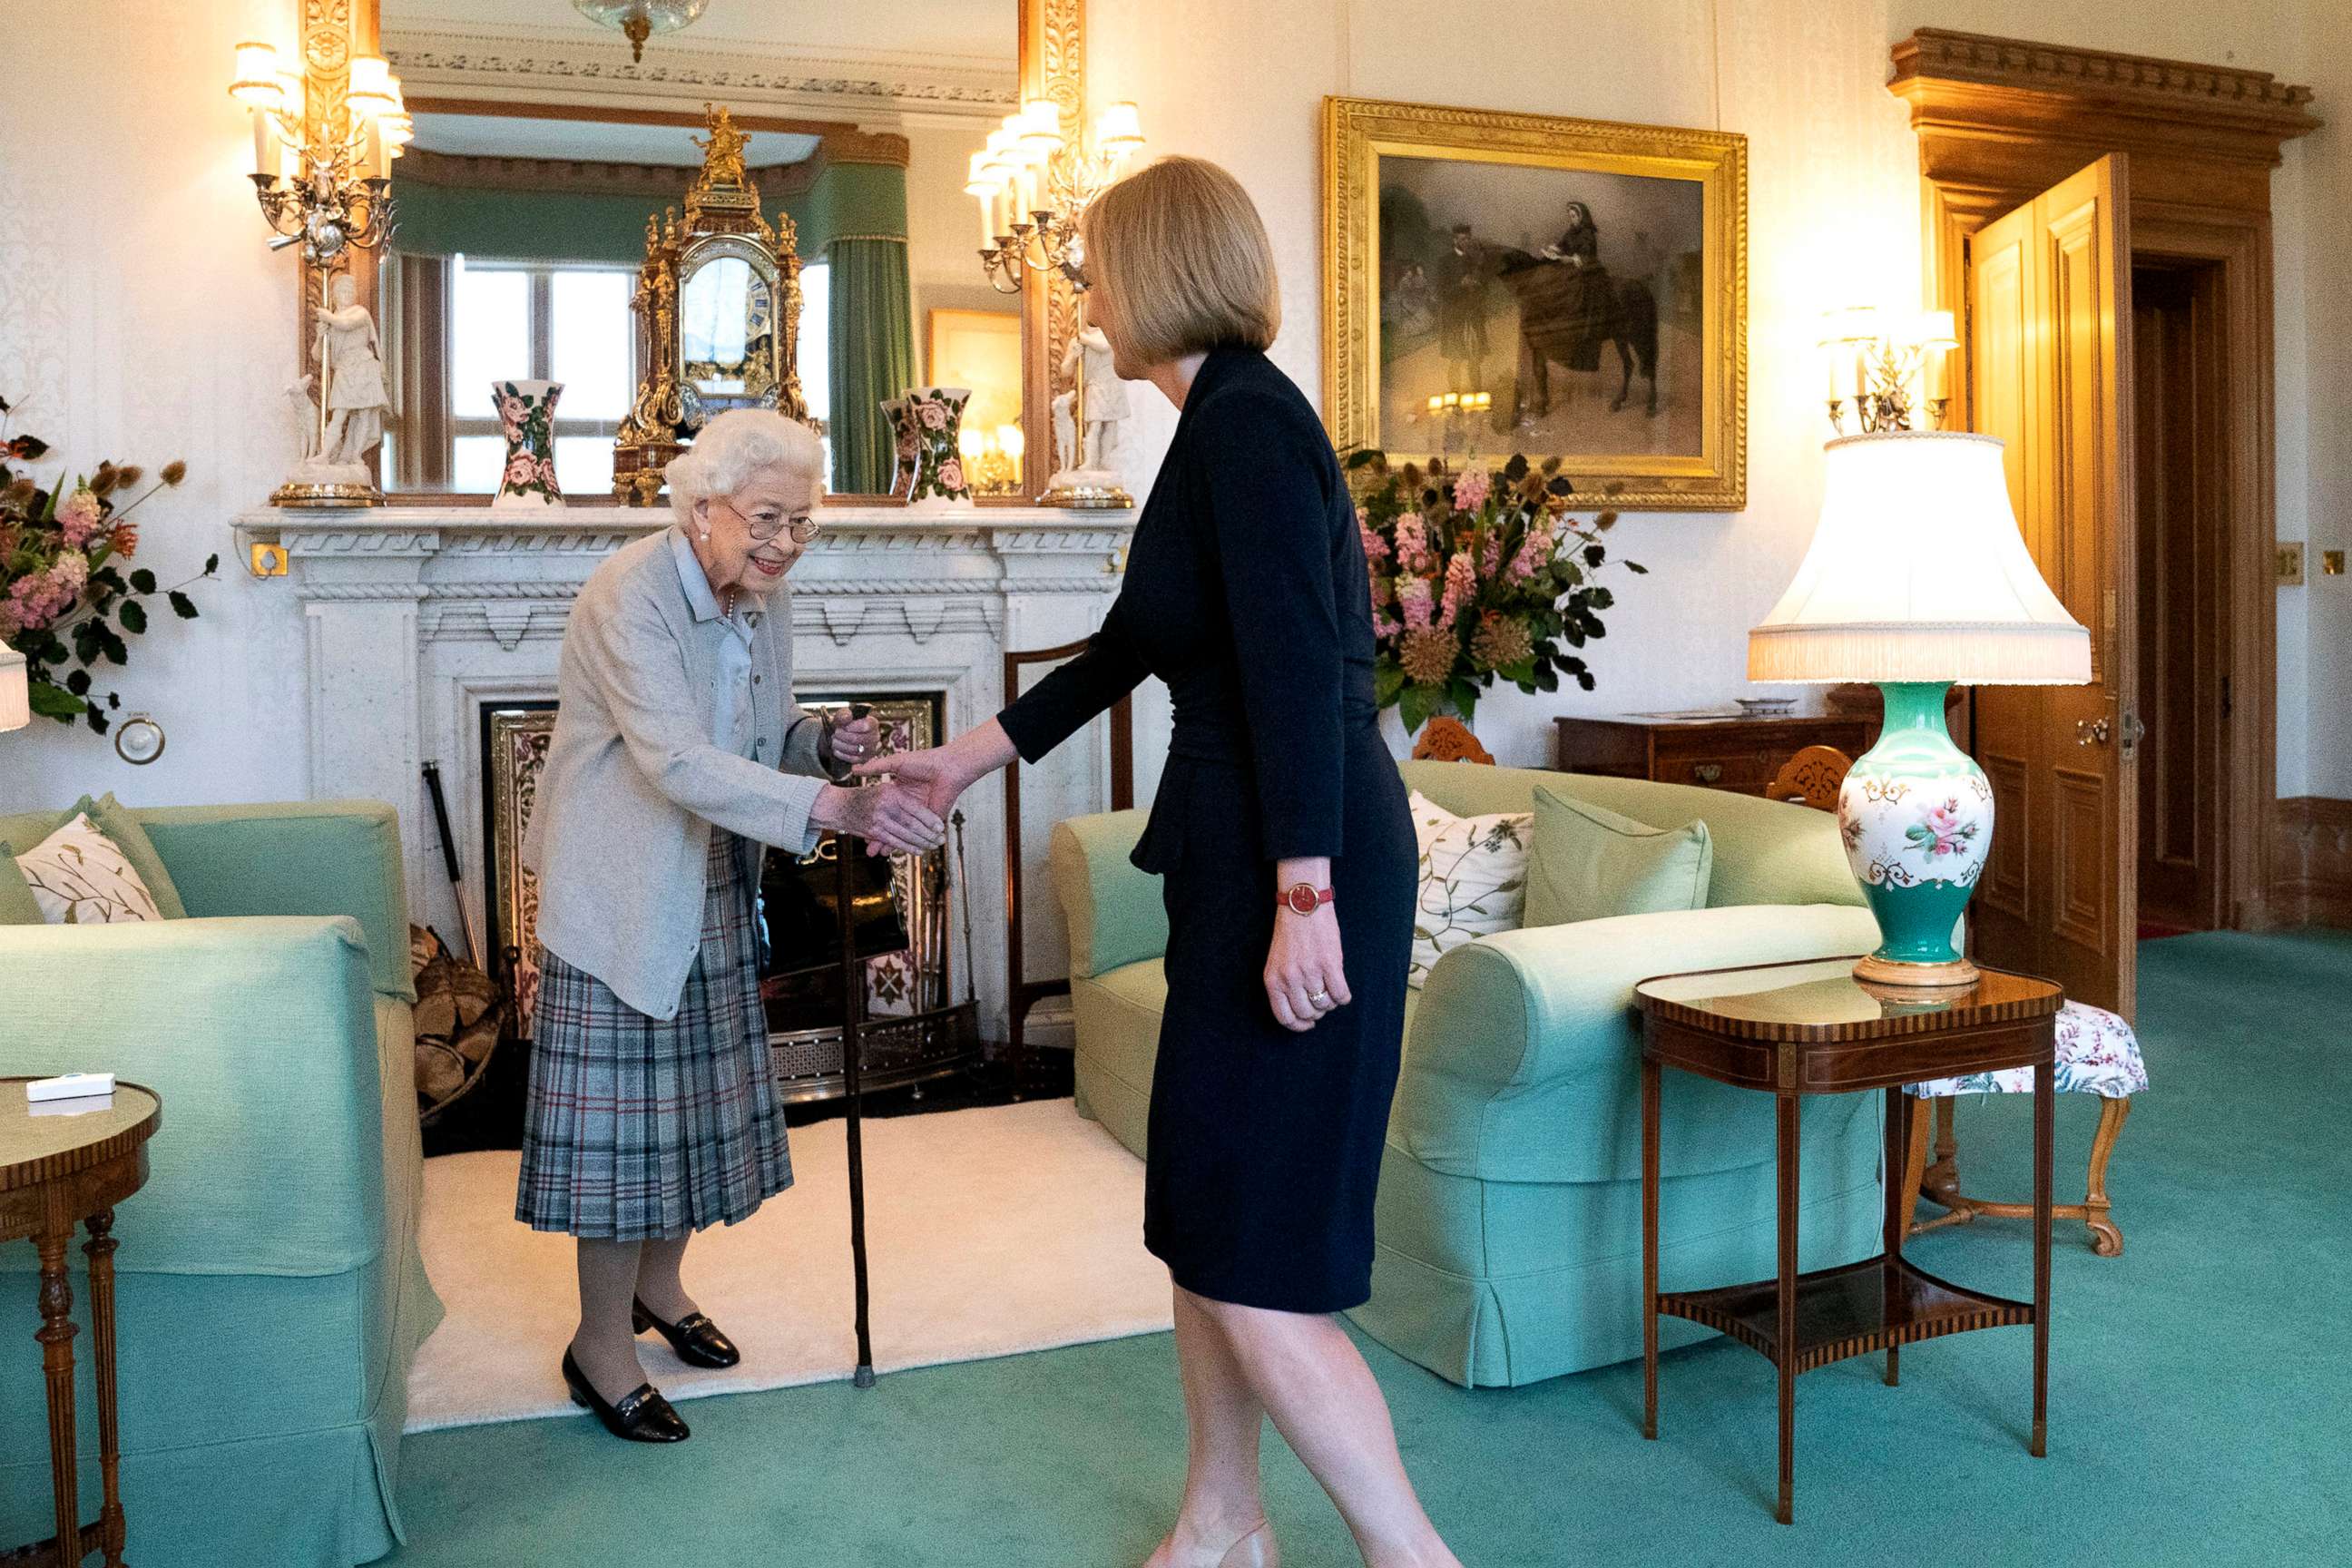 PHOTO: Queen Elizabeth II, left, welcomes Liz Truss during an audience at Balmoral, Scotland, where she invited the newly elected leader of the Conservative party to become Prime Minister and form a new government, Sept. 6, 2022.